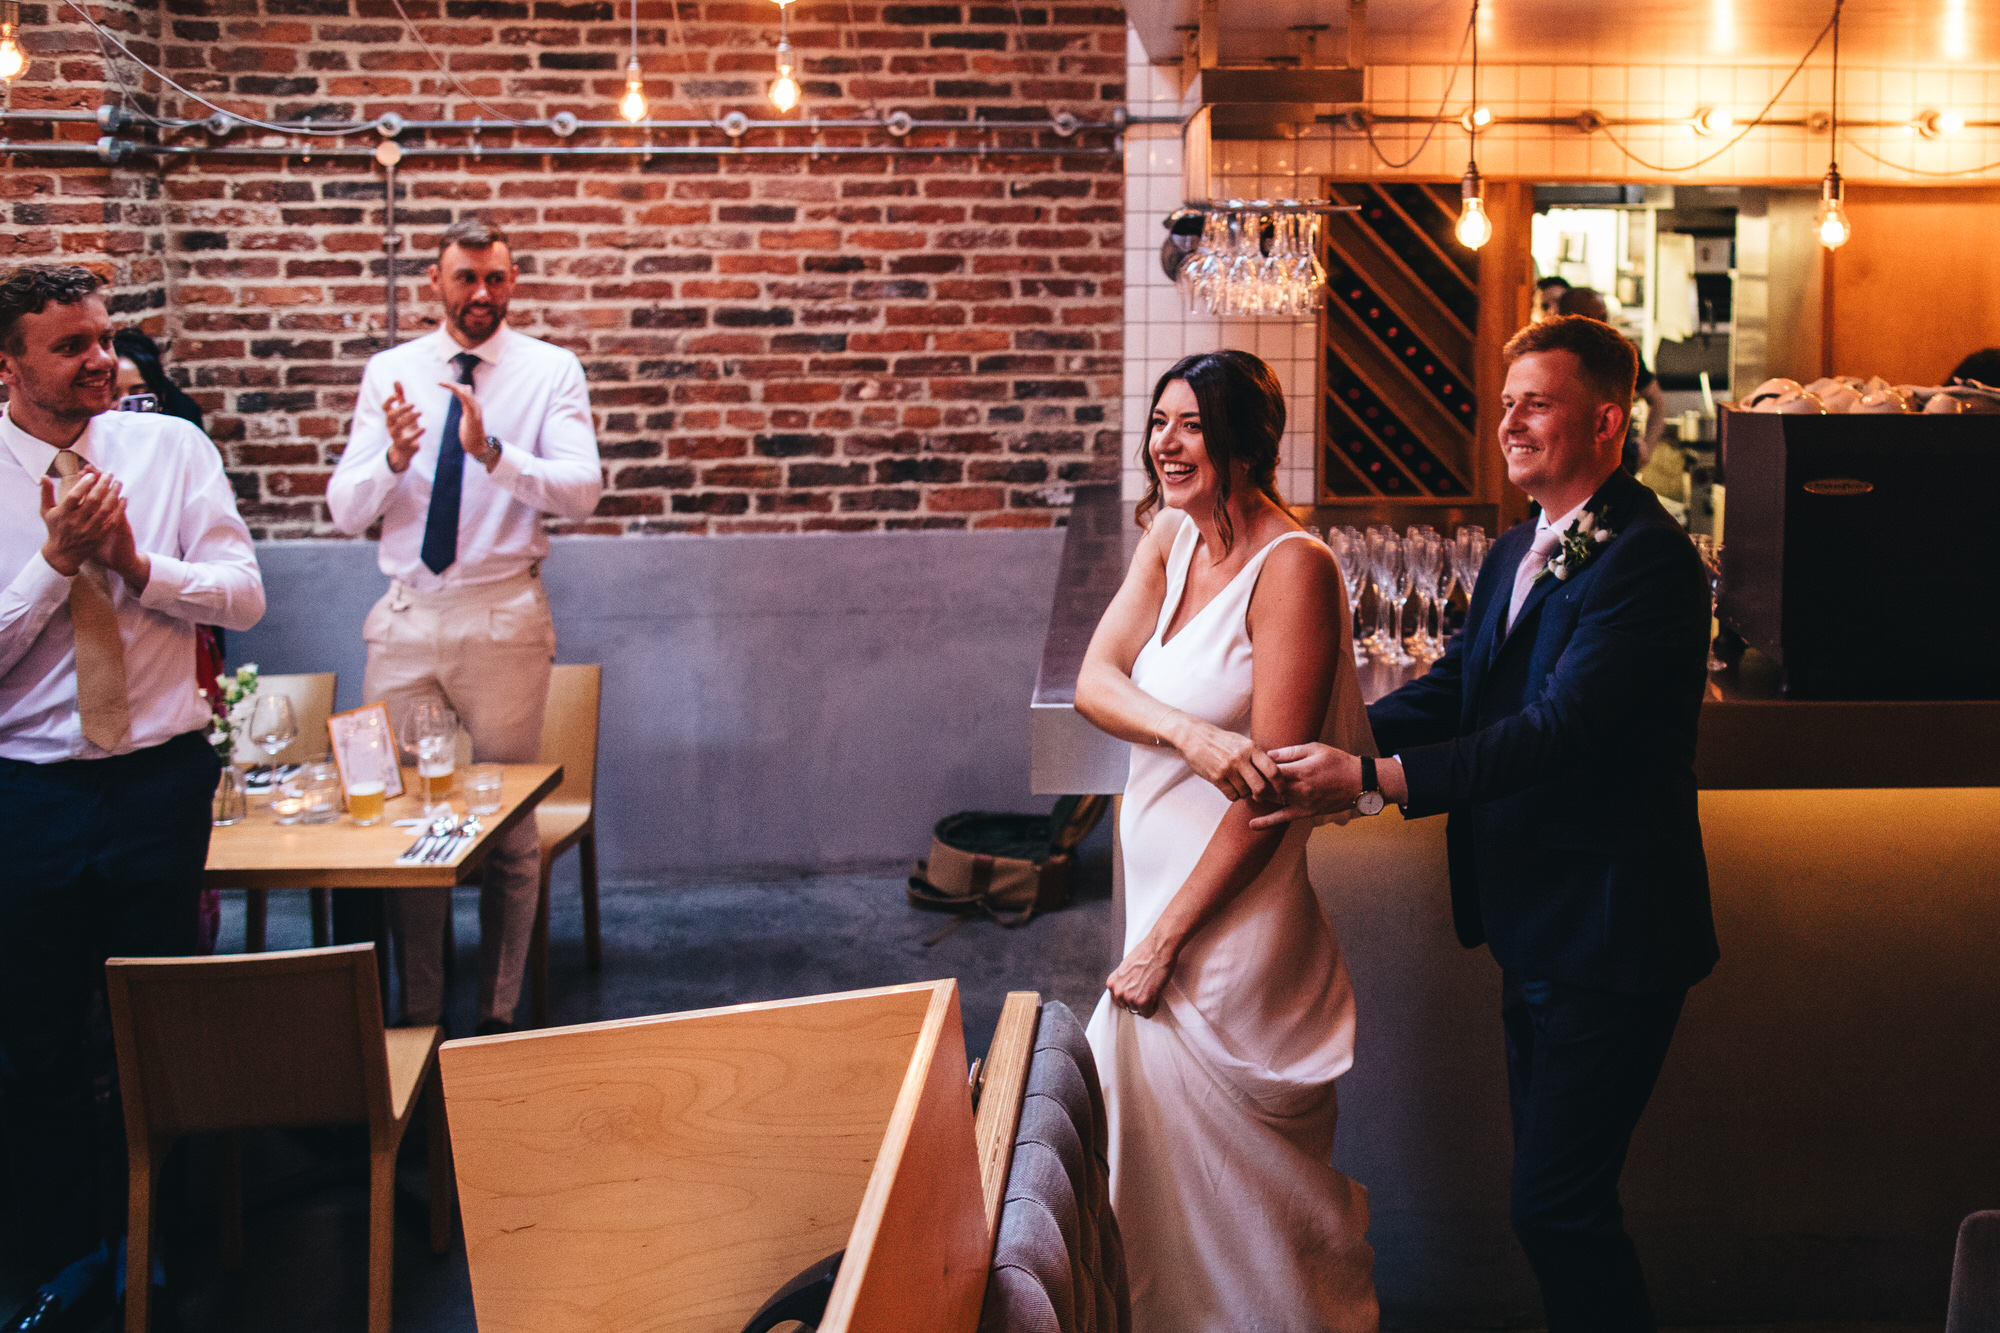 bride and groom enter room with guests clapping